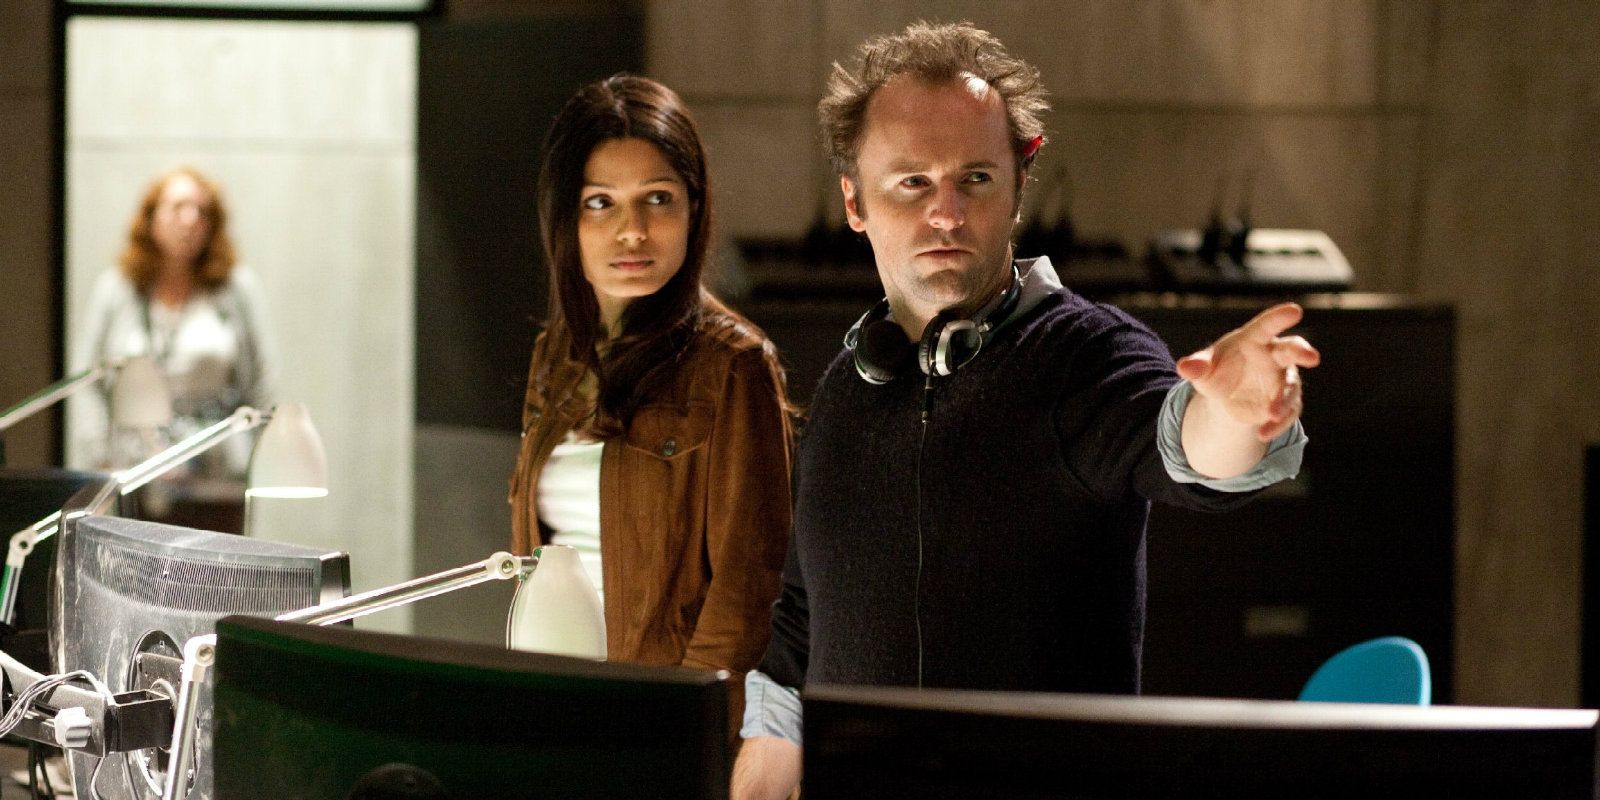 Rupert Wyatt directs Freida Pinto in Rise of the Planet of the Apes